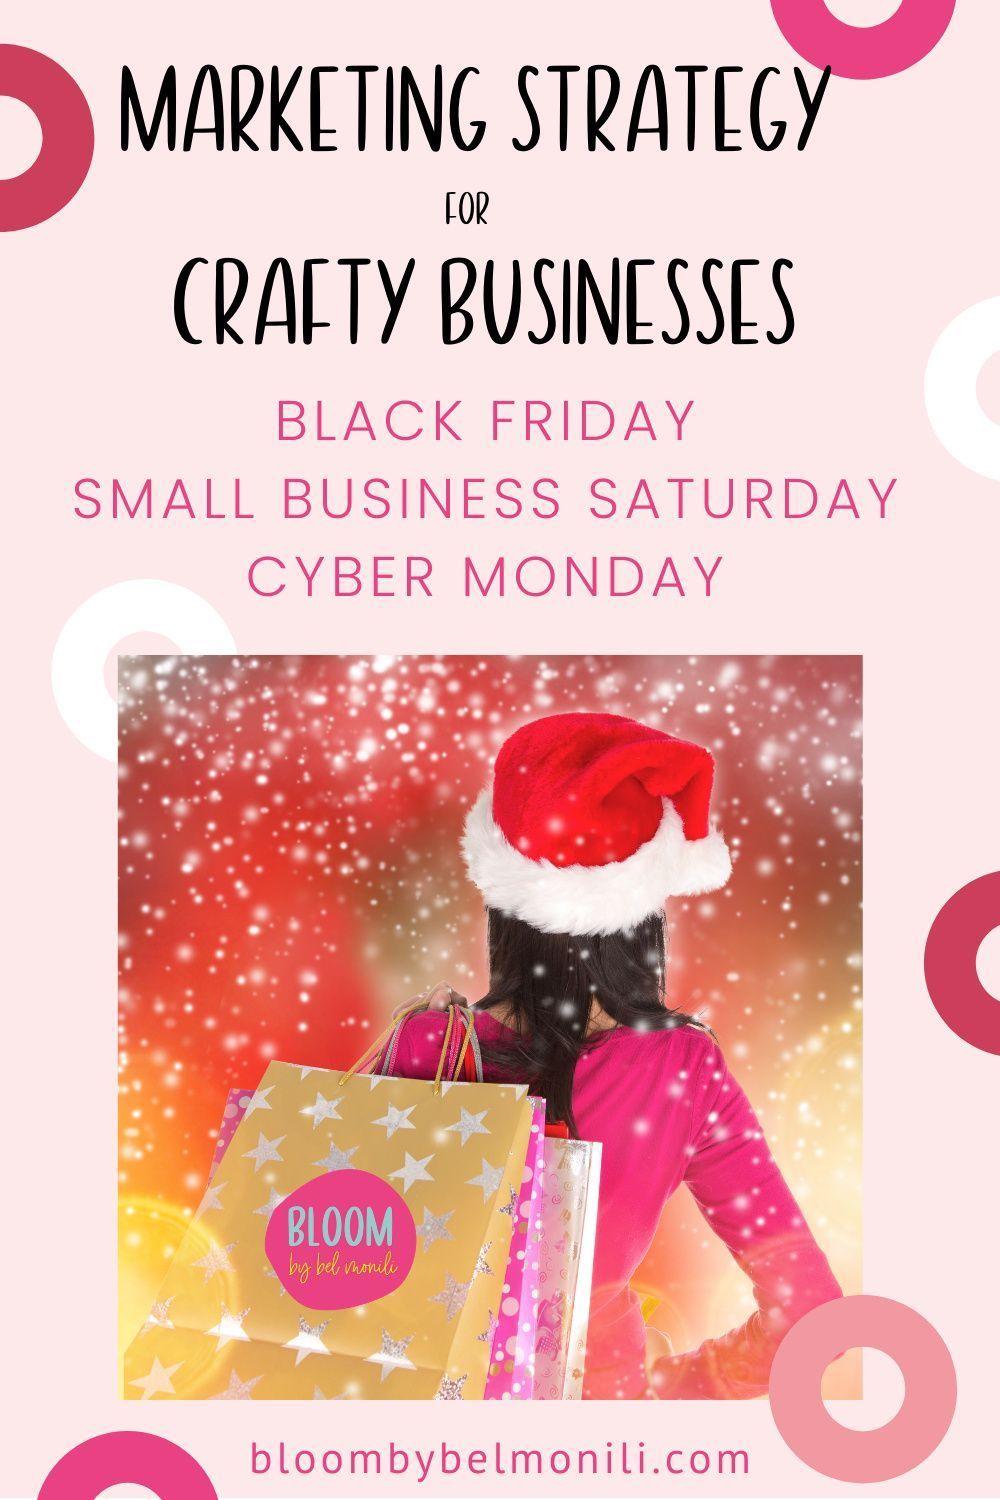 Your Marketing Strategy for Black Friday/Small Business Saturday/Cyber Monday Bloom by Belmonili Bl -   18 small business saturday marketing holidays ideas